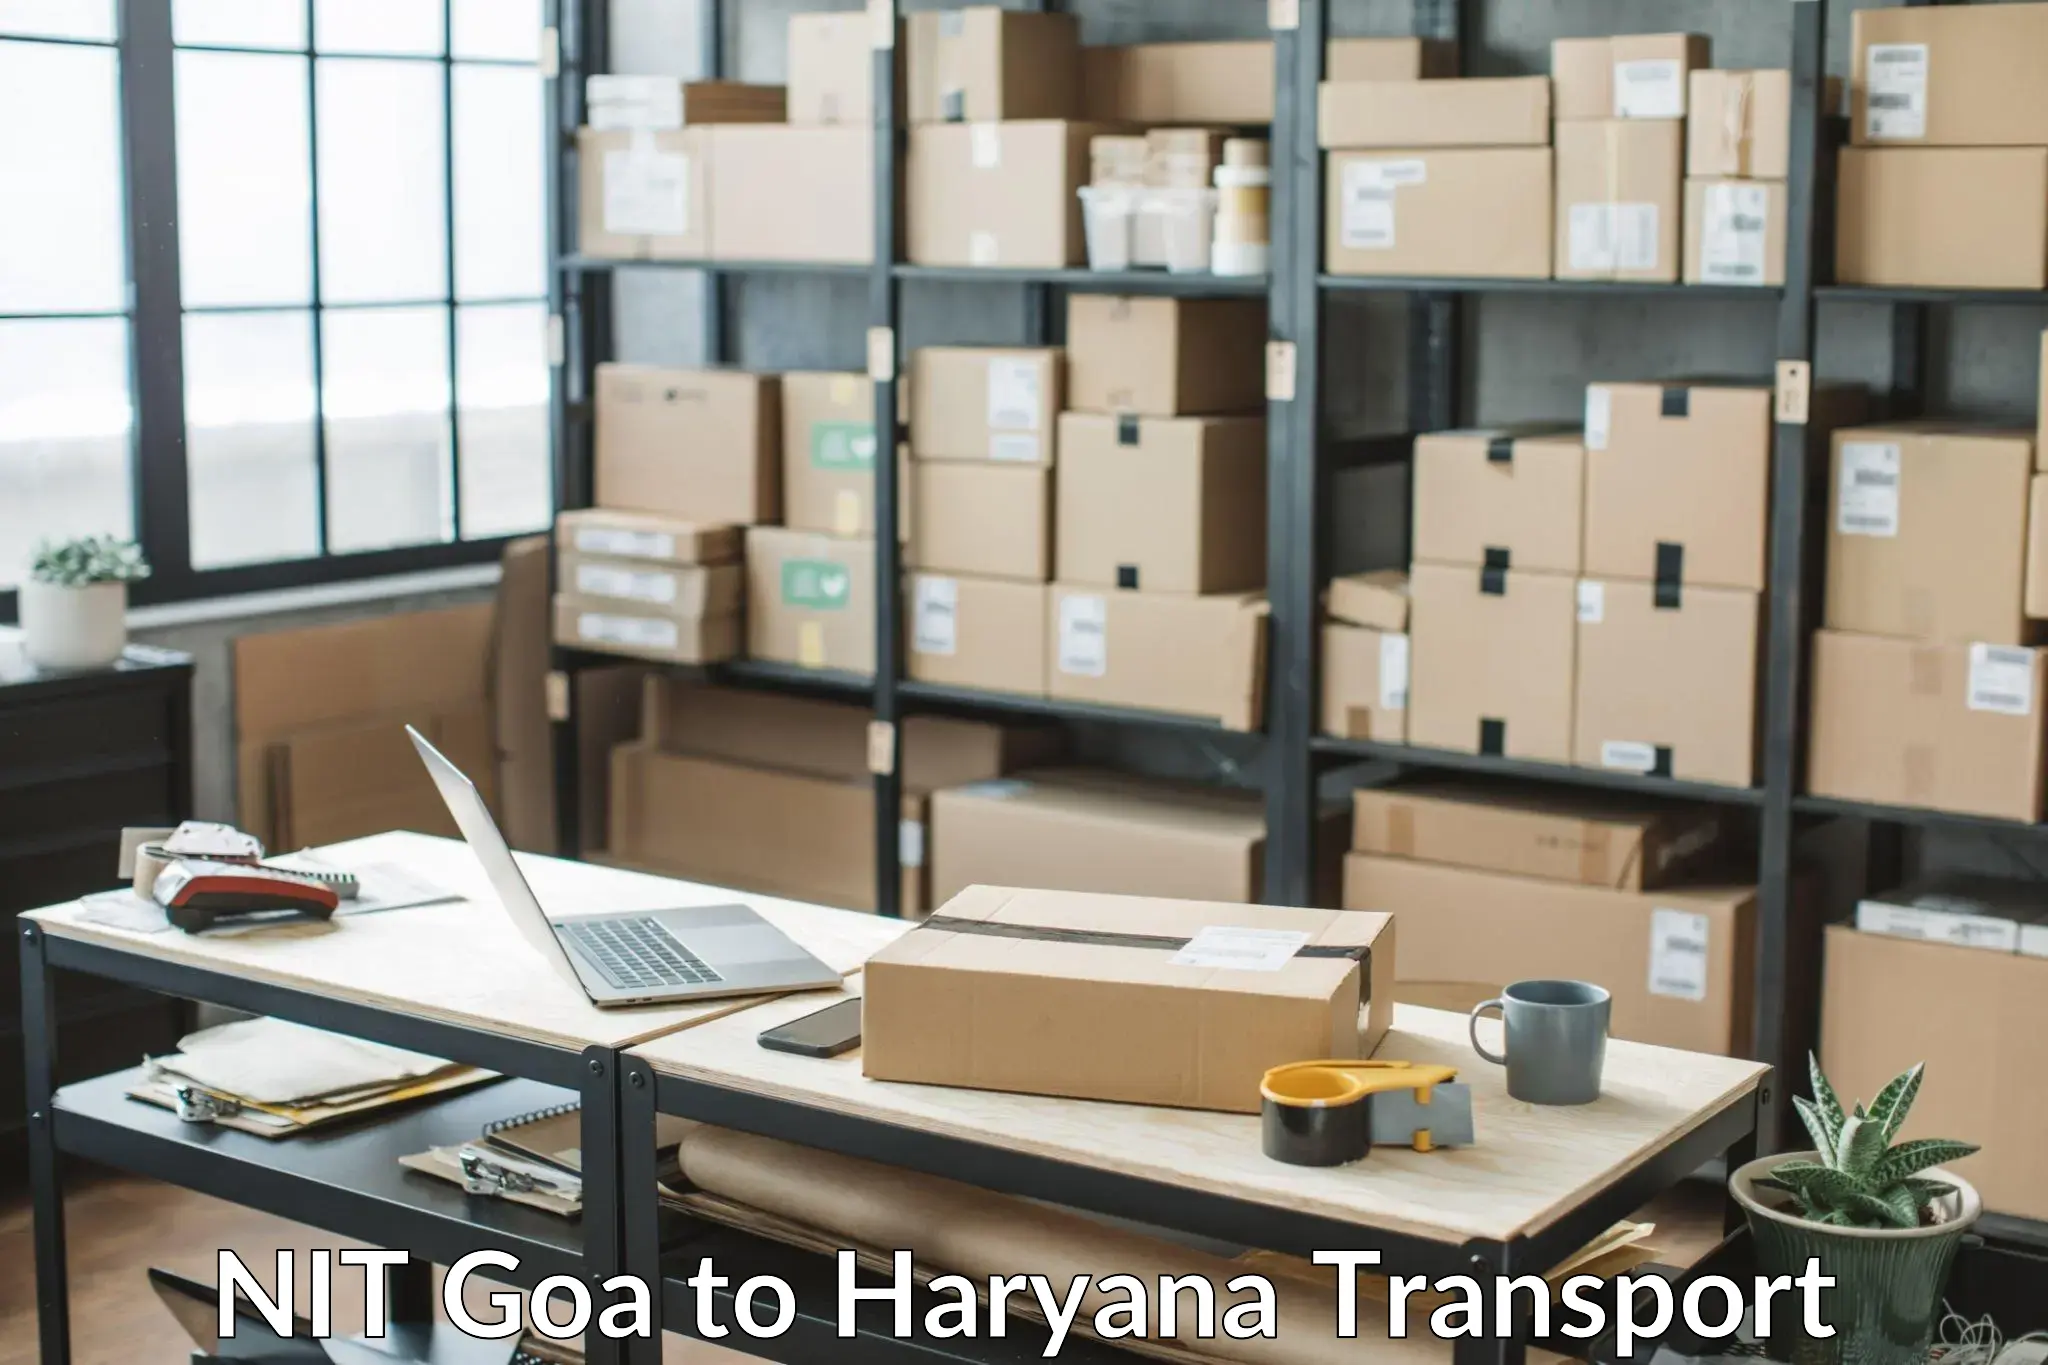 Container transport service NIT Goa to Chaudhary Charan Singh Haryana Agricultural University Hisar